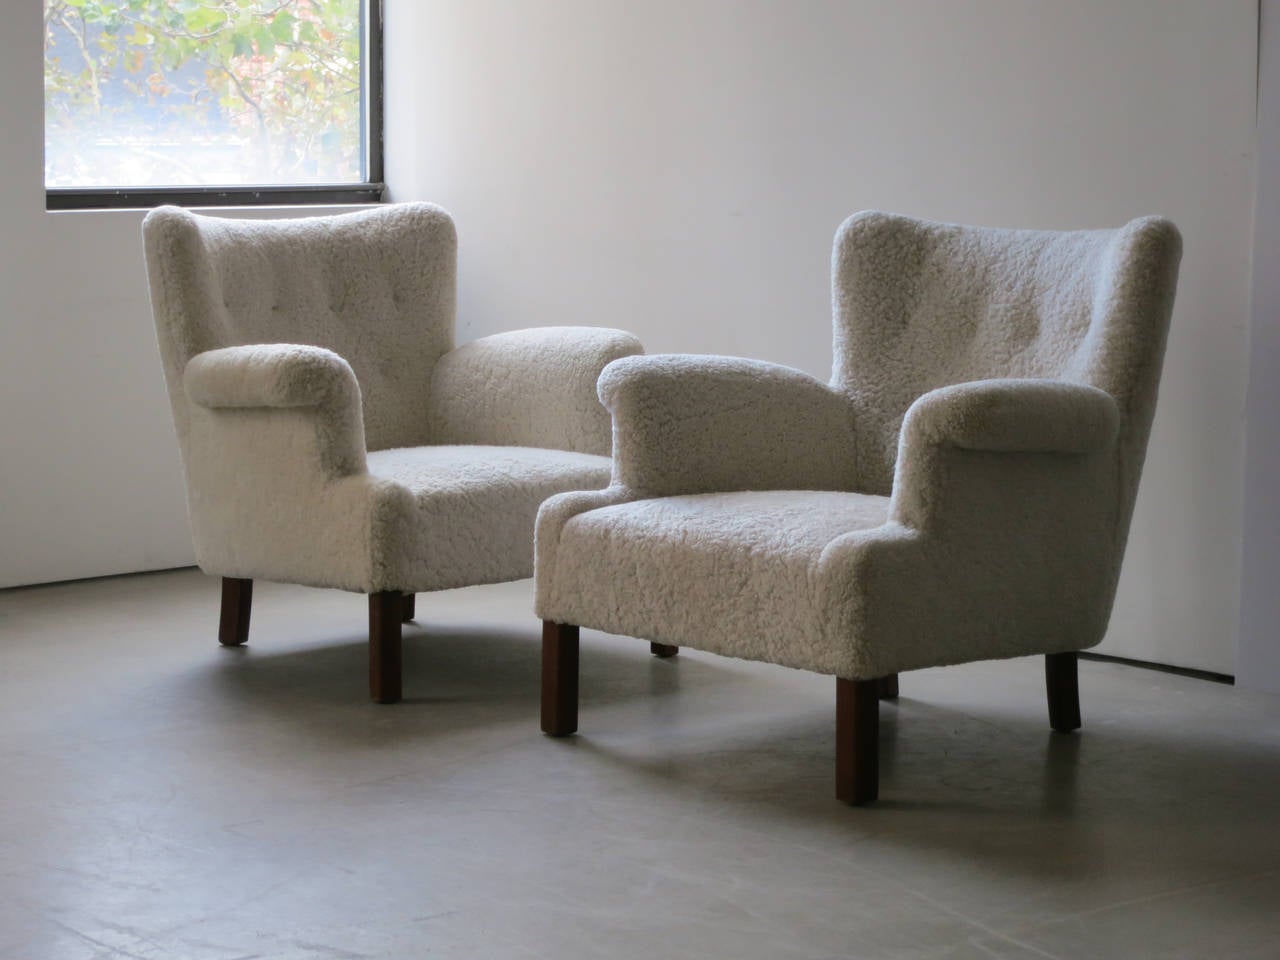 Danish Pair of Elegant and Refined Sheepskin Lounge Chairs by Orla Mølgaard-Nielsen